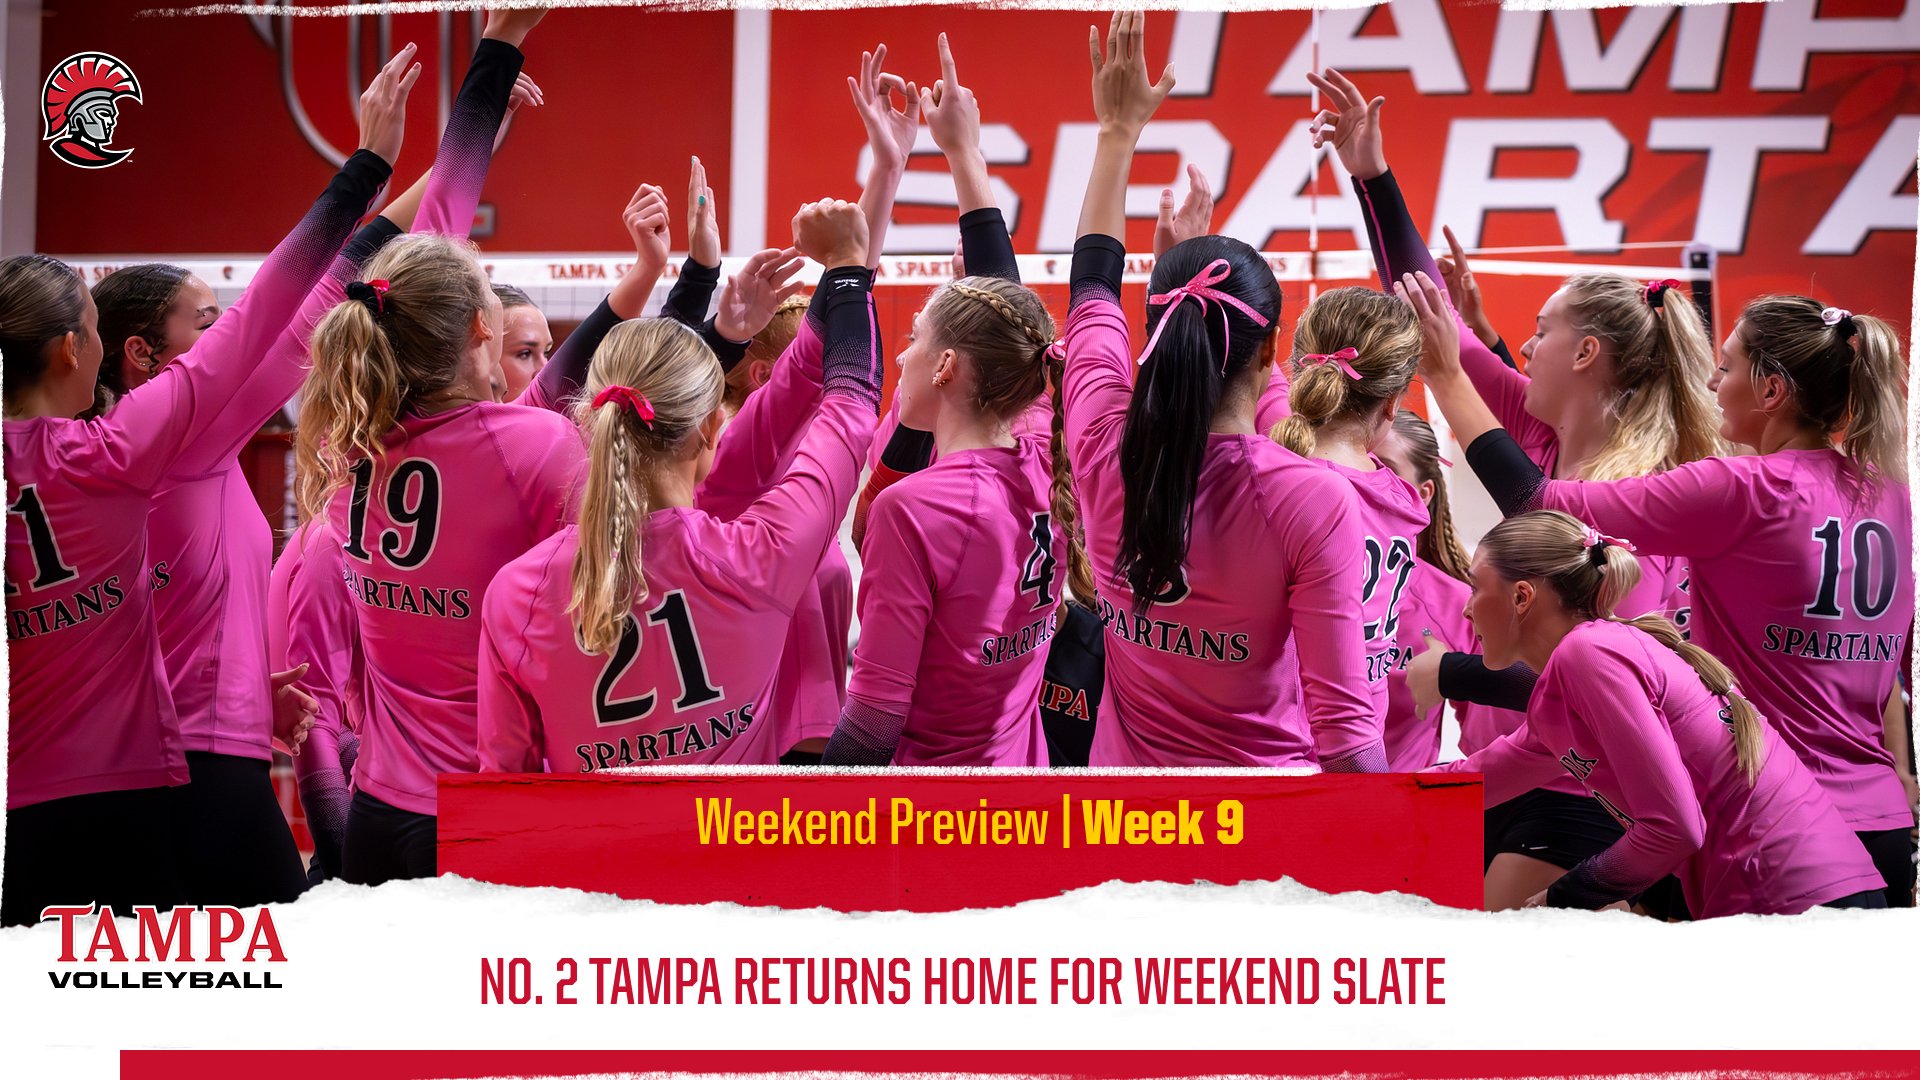 WEEKEND PREVIEW: No. 2 Tampa Returns Home For Pair of Weekend Matchups